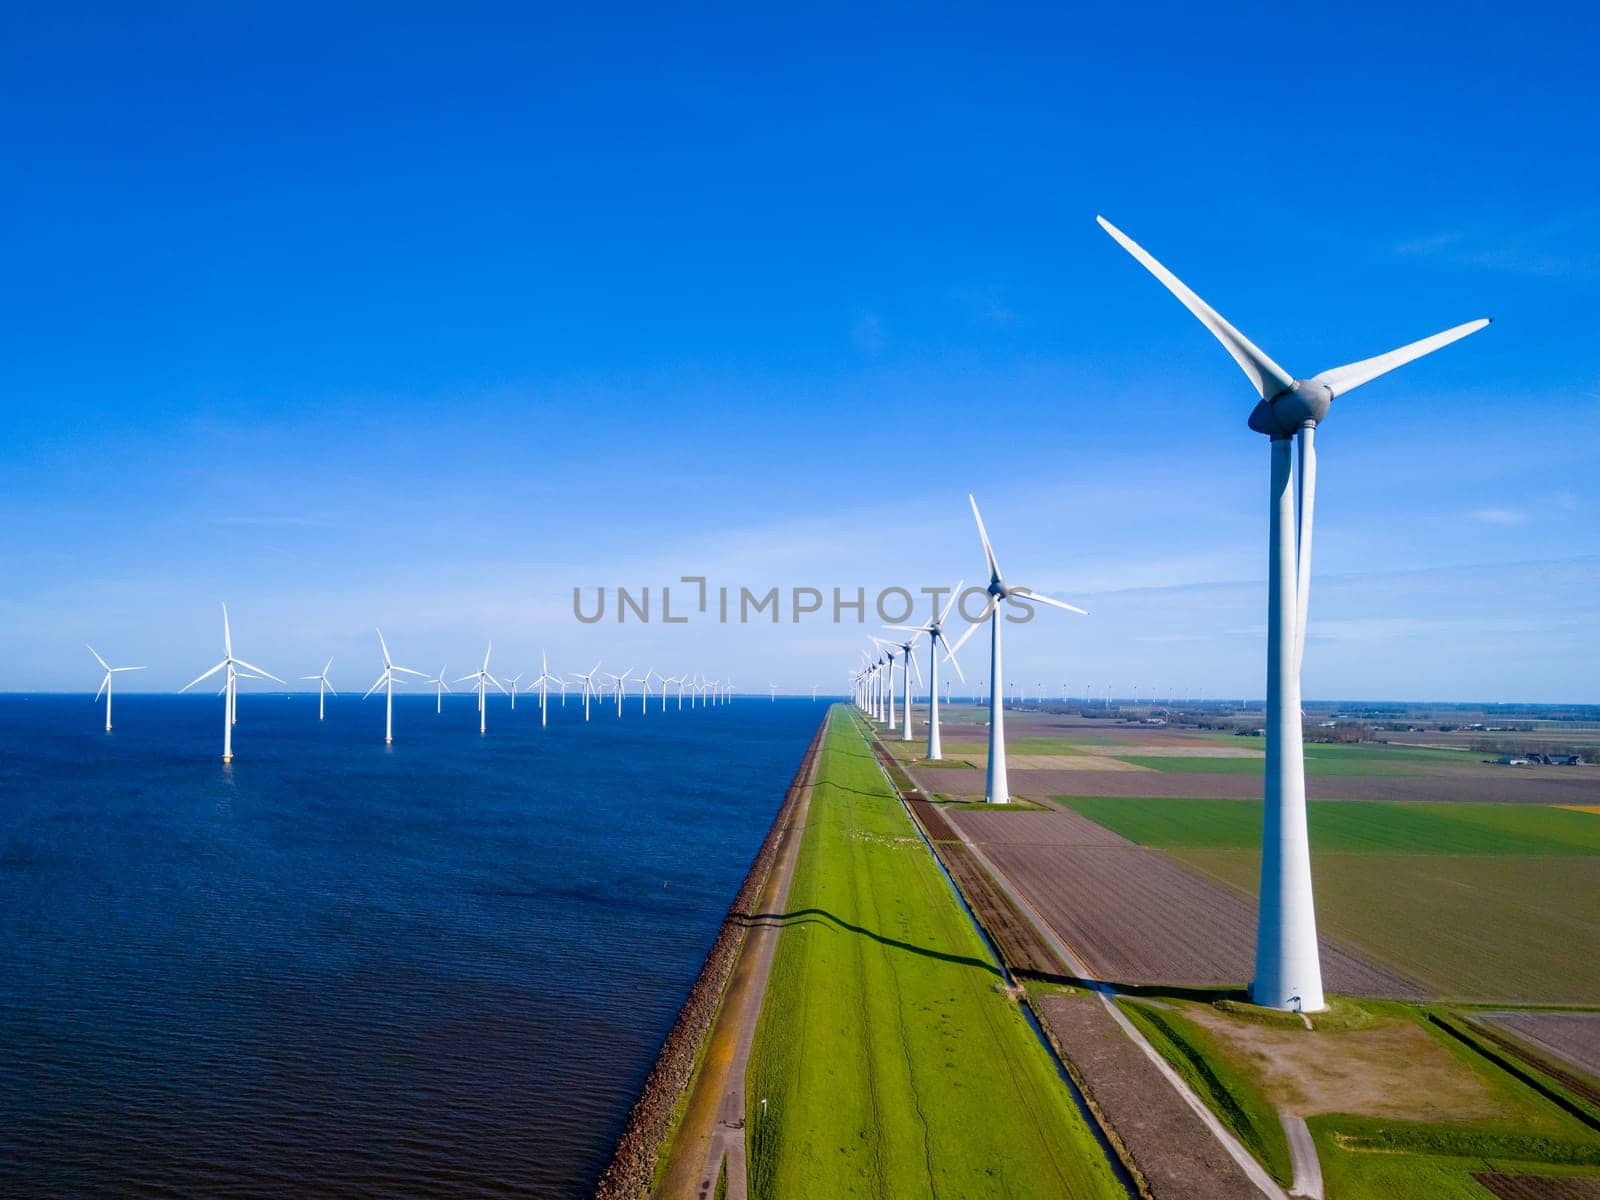 A serene scene of a row of wind turbines standing tall next to a calm body of water ocean by fokkebok